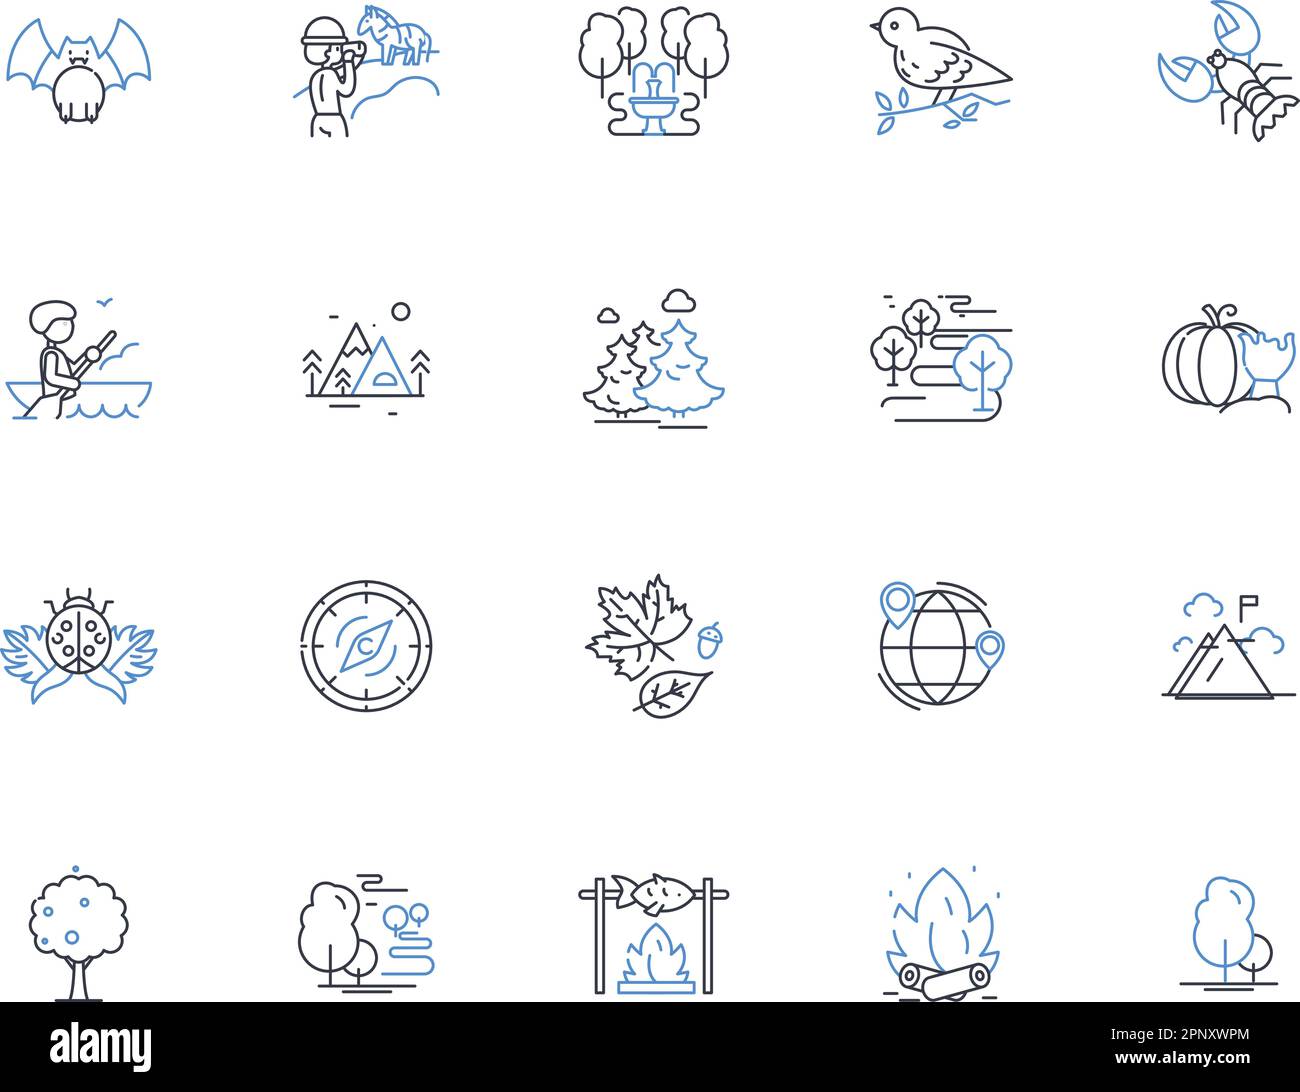 Pristine environment line icons collection. Wilderness, Unsullied, Pristine, Untouched, Unpolluted, Pure, Serene vector and linear illustration Stock Vector